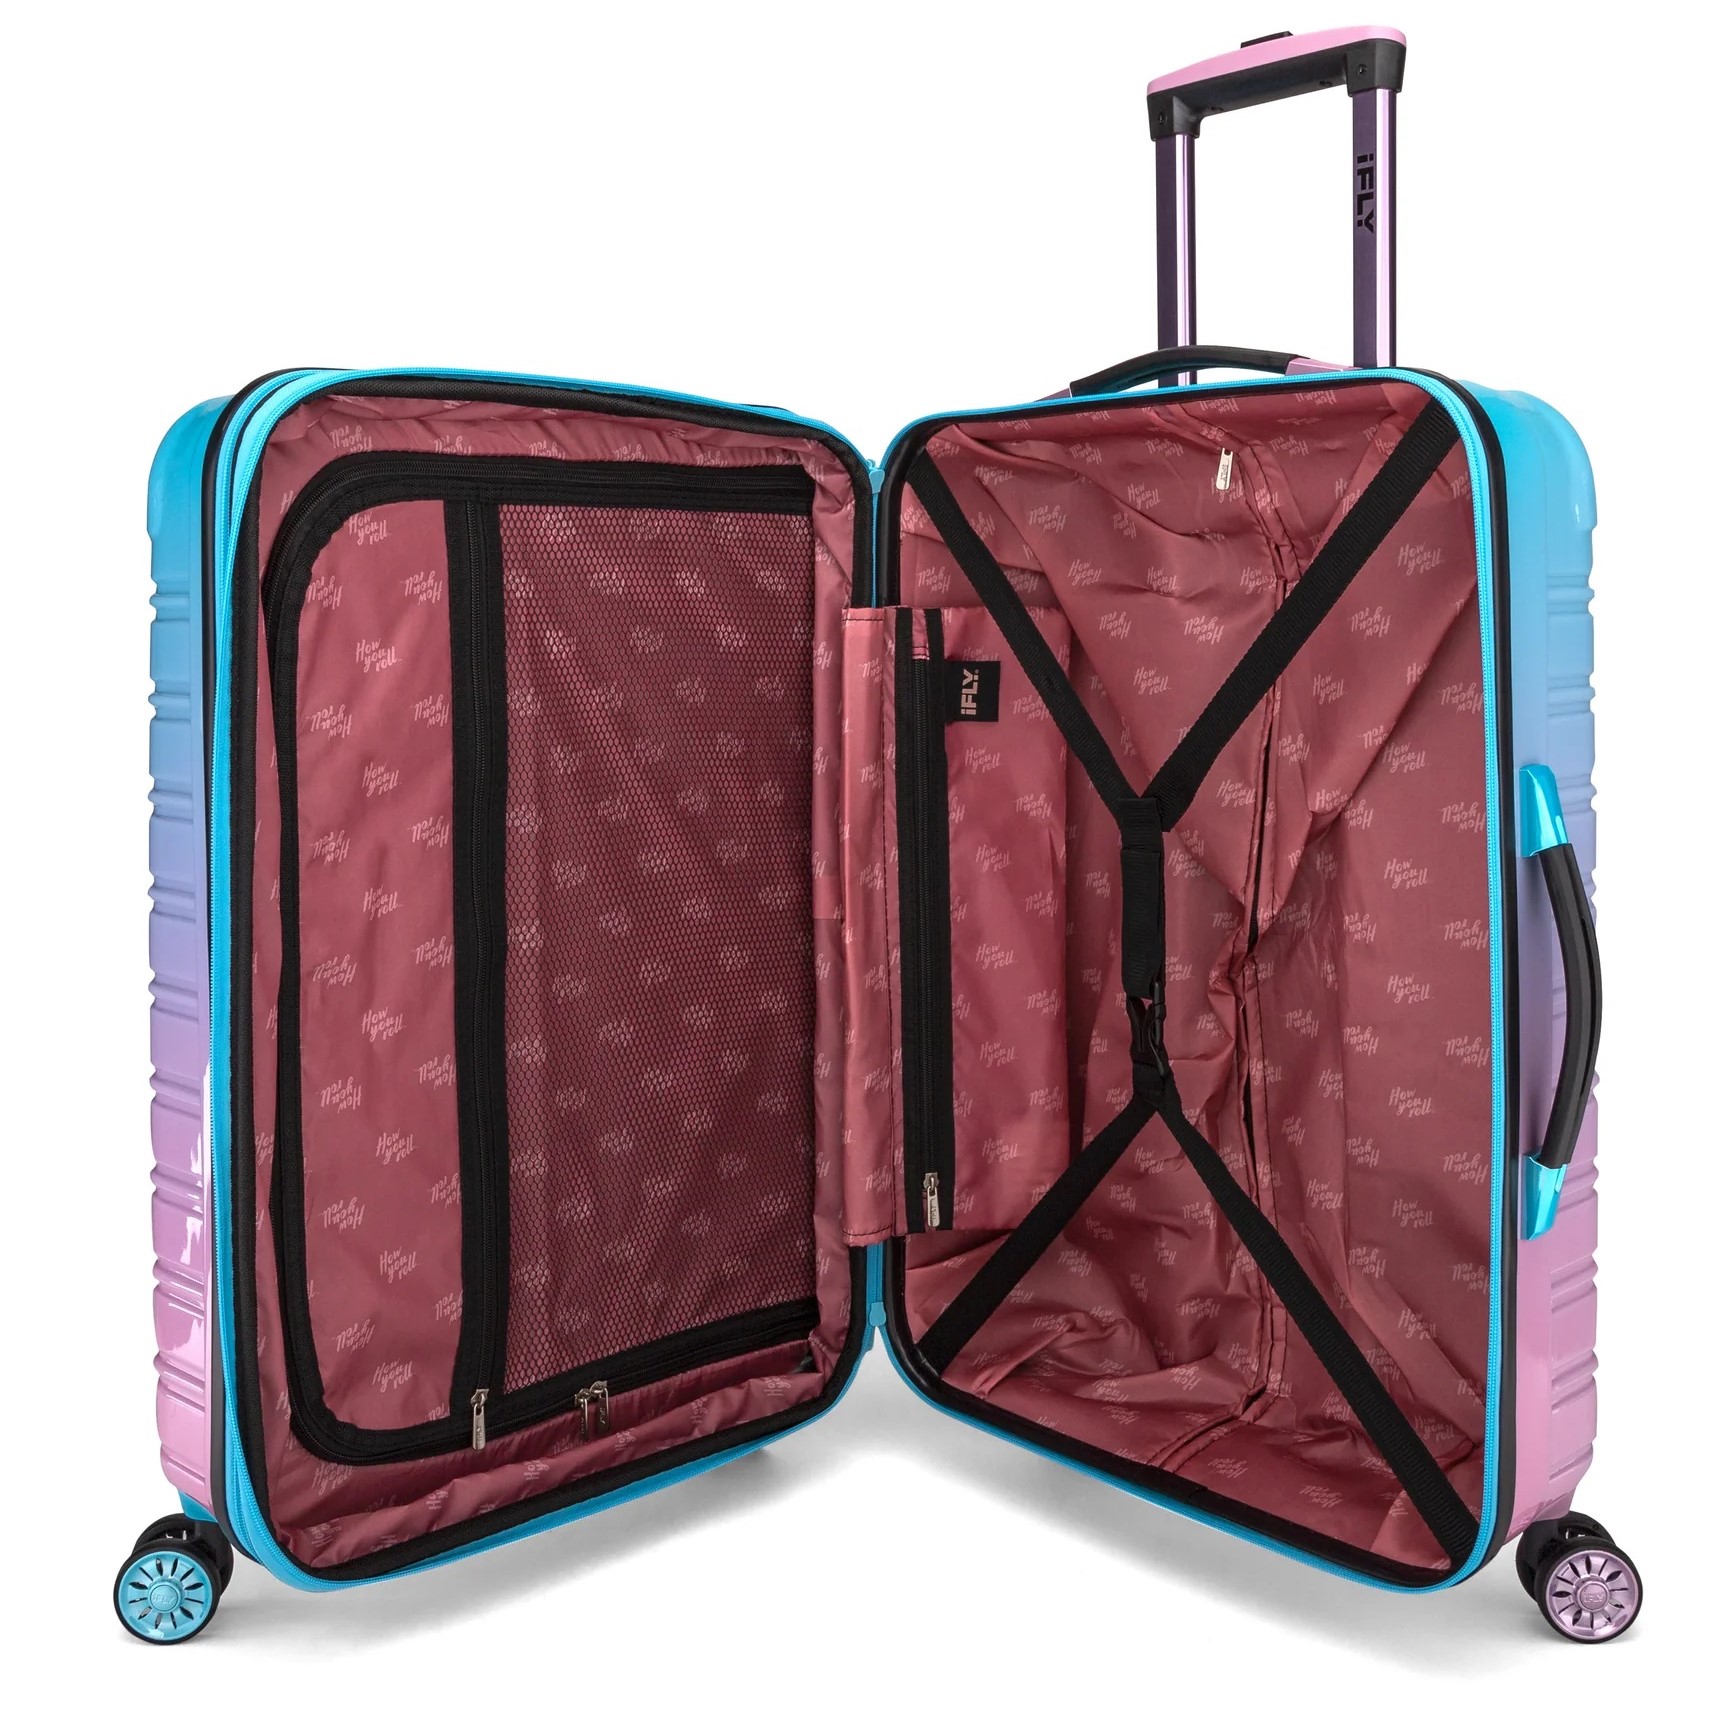 VALI DU LỊCH MÀU LOANG IFLY FIBERTECH OMBRE HARDSIDE LUGGAGE IN COTTON CANDY 15